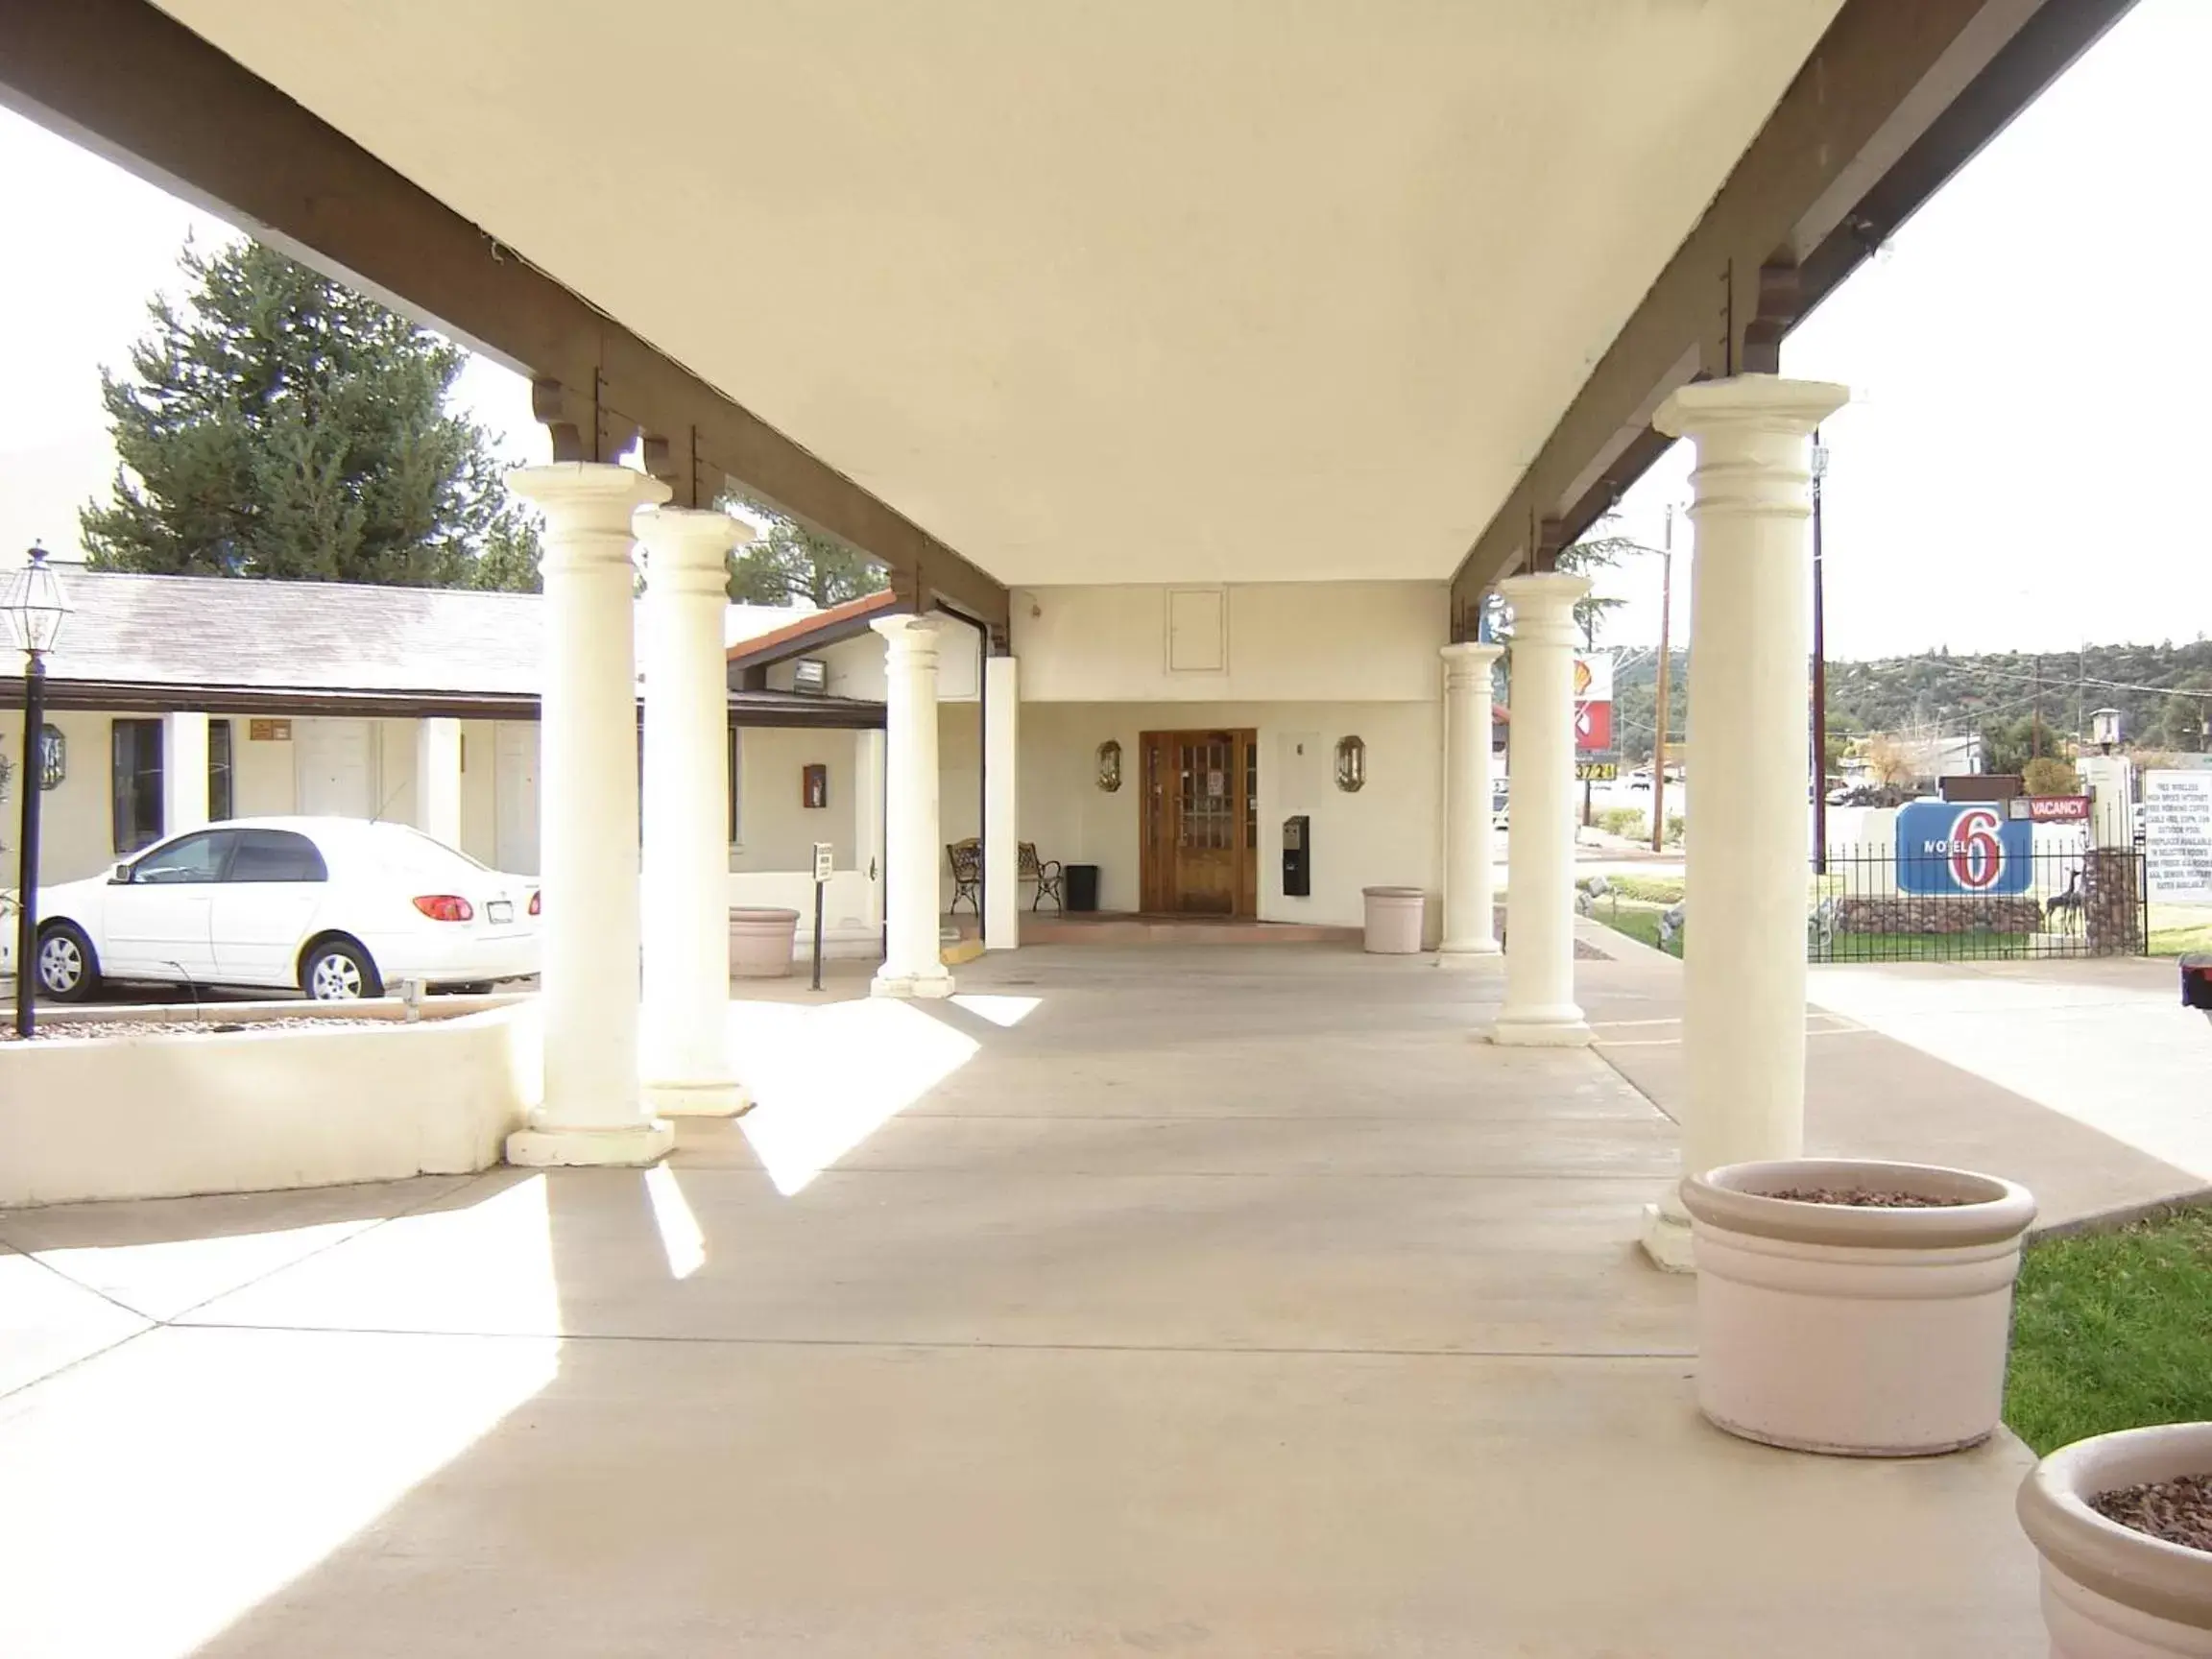 Area and facilities in Motel 6-Payson, AZ